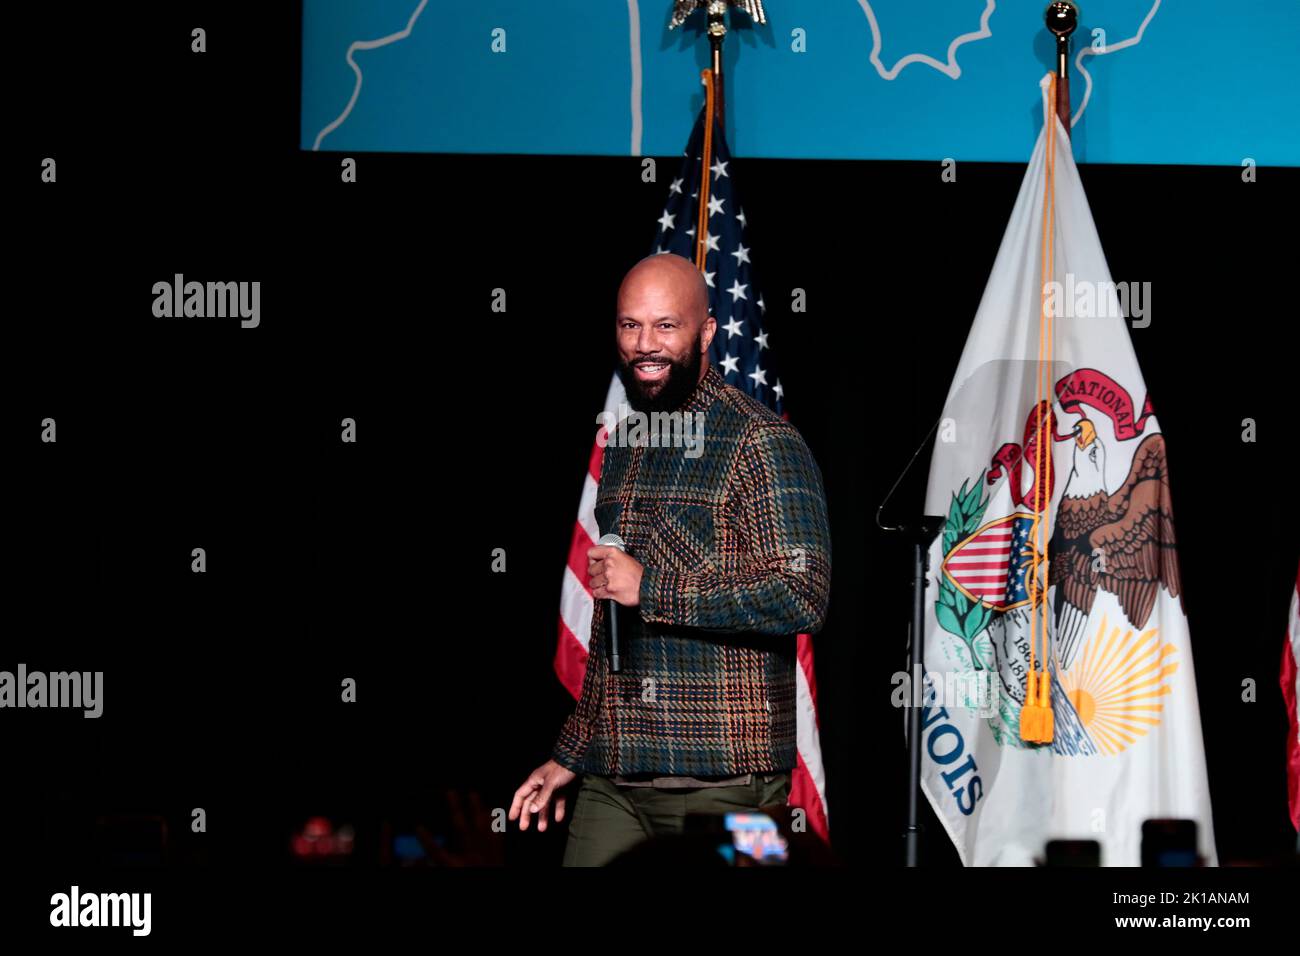 Chicago, Illinois. 16th Sep, 2022. American rapper and actor Lonnie Rashid Lynn, known by his stage name Common, participates in a political event with Governor J.B. Pritzker (Democrat of Illinois) and United States Vice President Kamala Harris at the University of Illinois, in Chicago, Illinois, on September 16, 2022. Credit: Mustafa Hussain/Pool via CNP/dpa/Alamy Live News Stock Photo